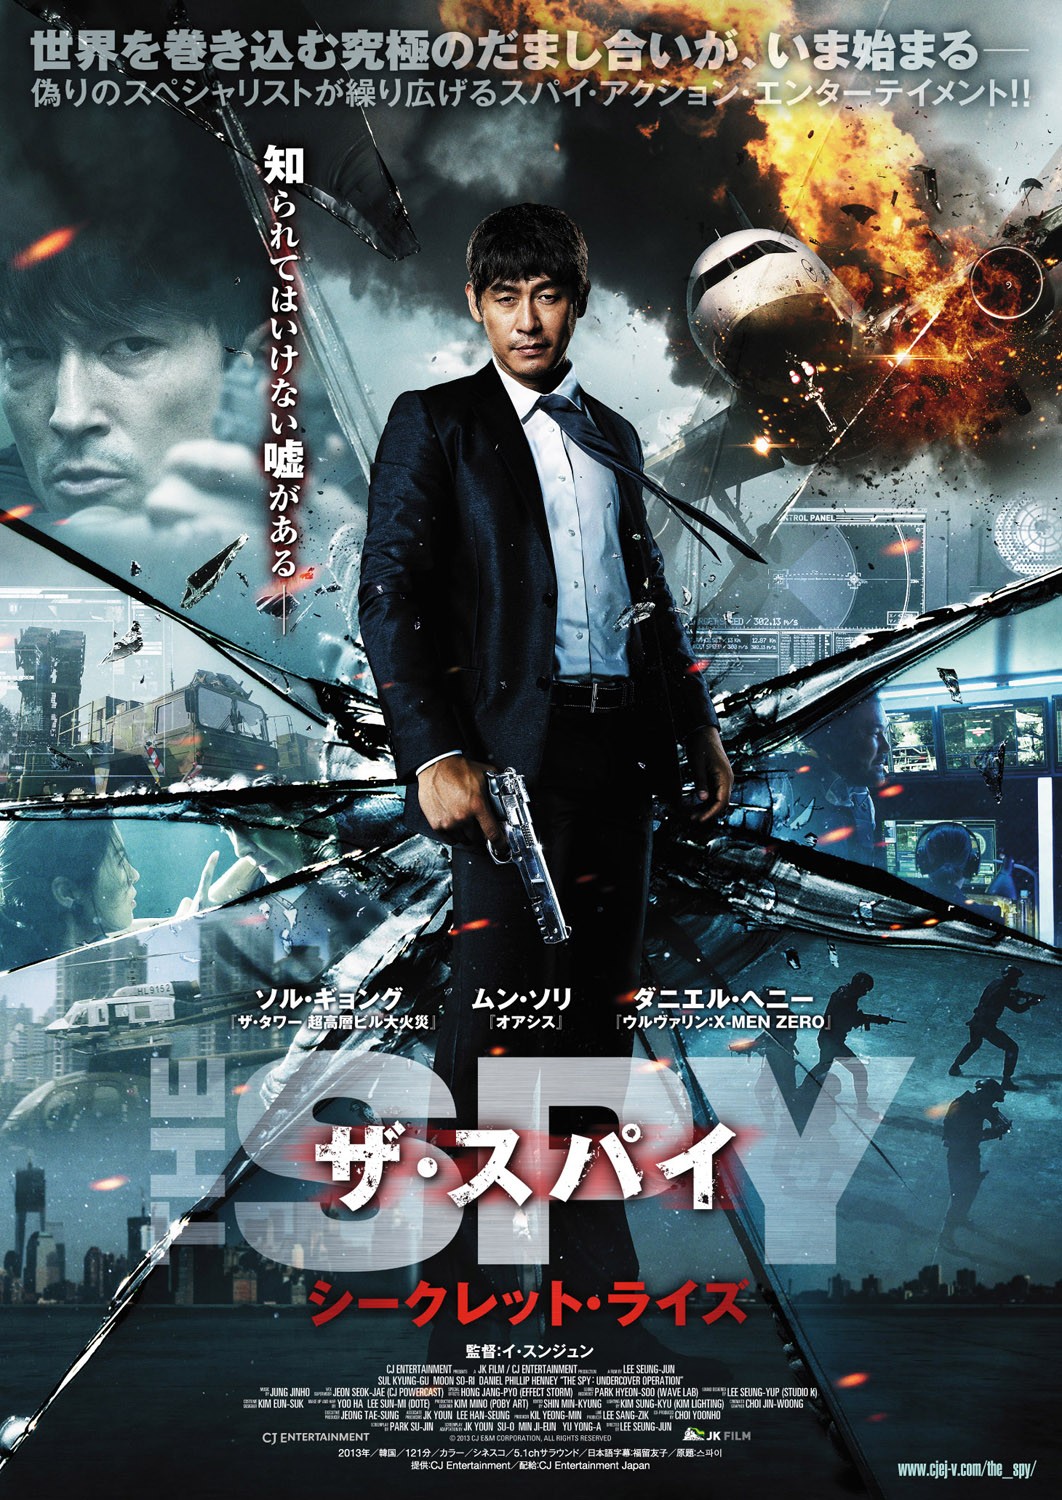 Extra Large Movie Poster Image for Seu-pa-i 